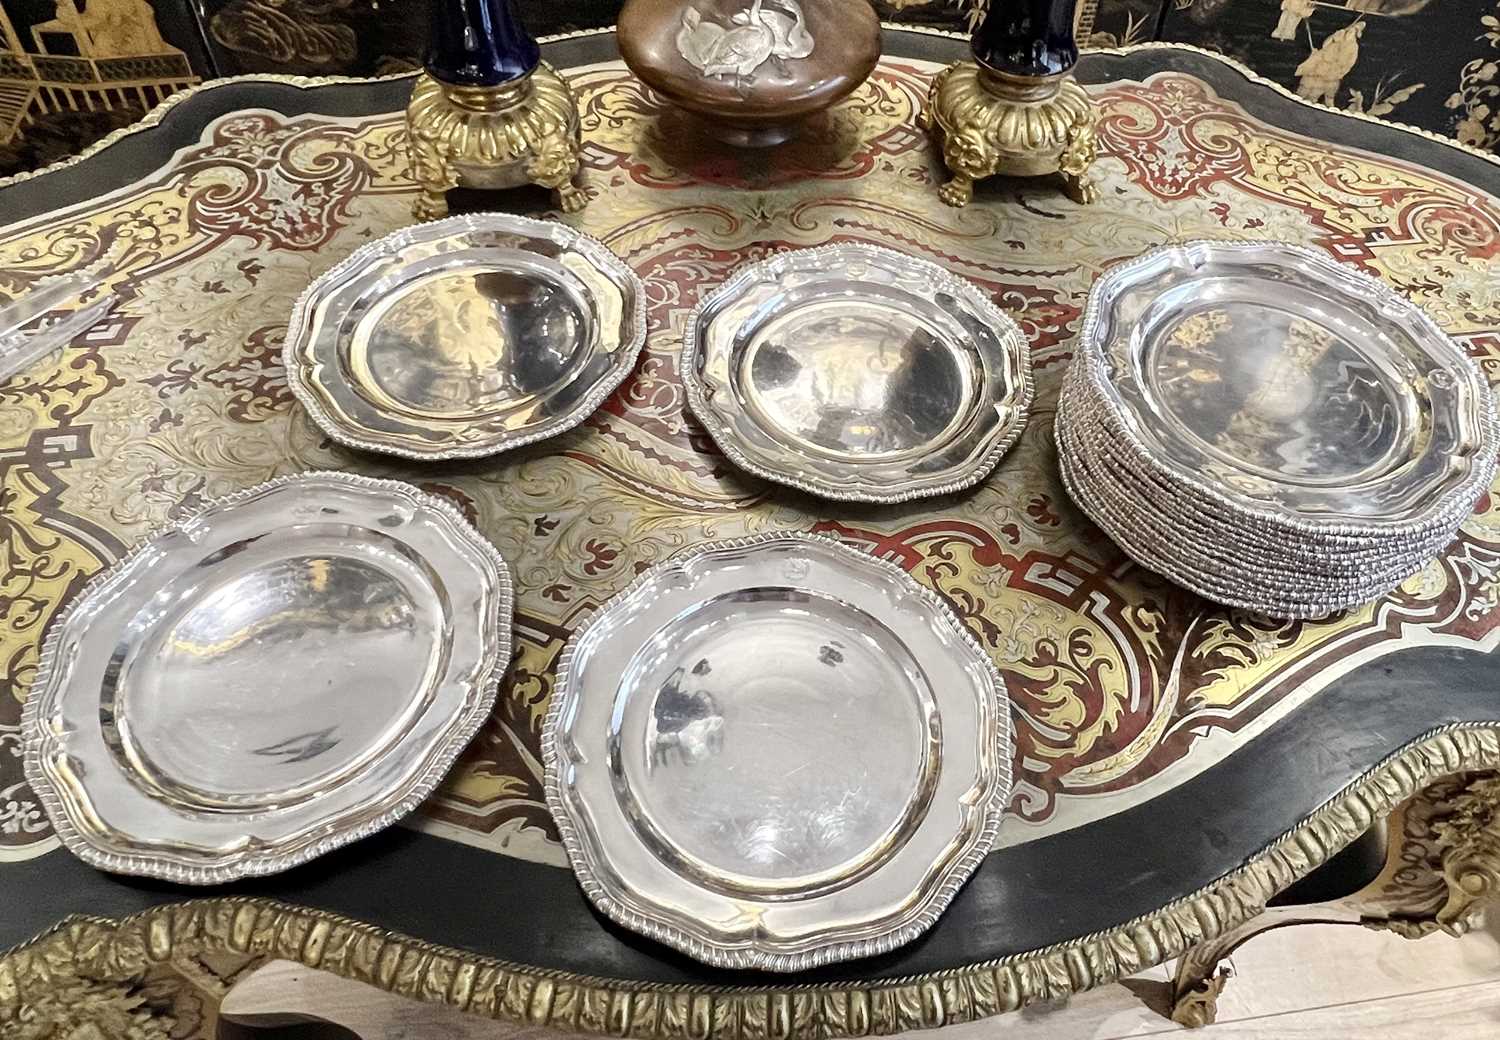 A SET OF 24 STERLING SILVER 19TH CENTURY DINNER PLATES BY ROBERT GARRARD II, 1865 - Image 8 of 8